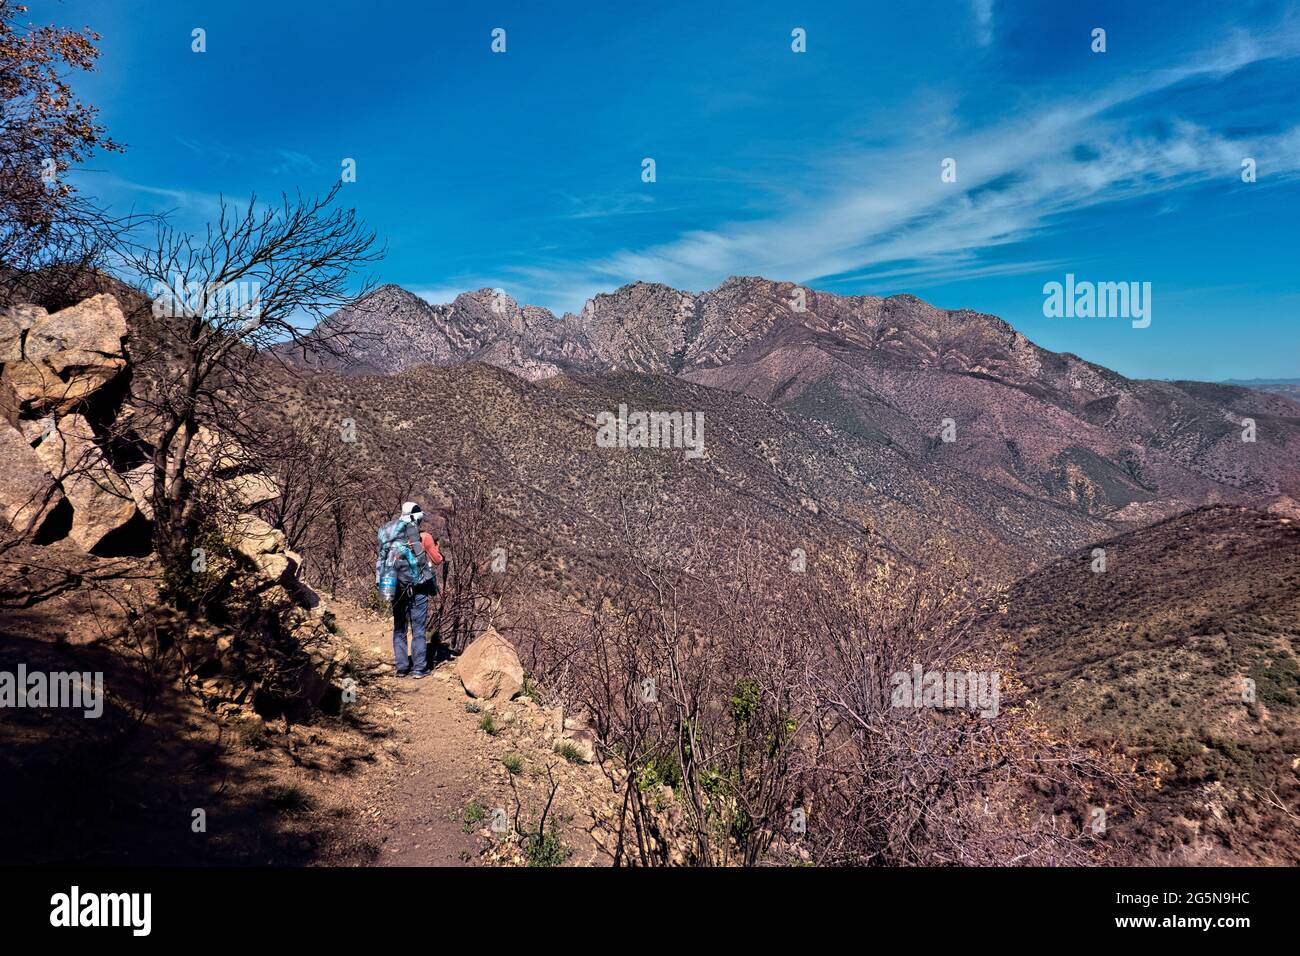 Backpacking the Four Peaks Wilderness, Tonto National Forest, Arizona, USA Stockfoto